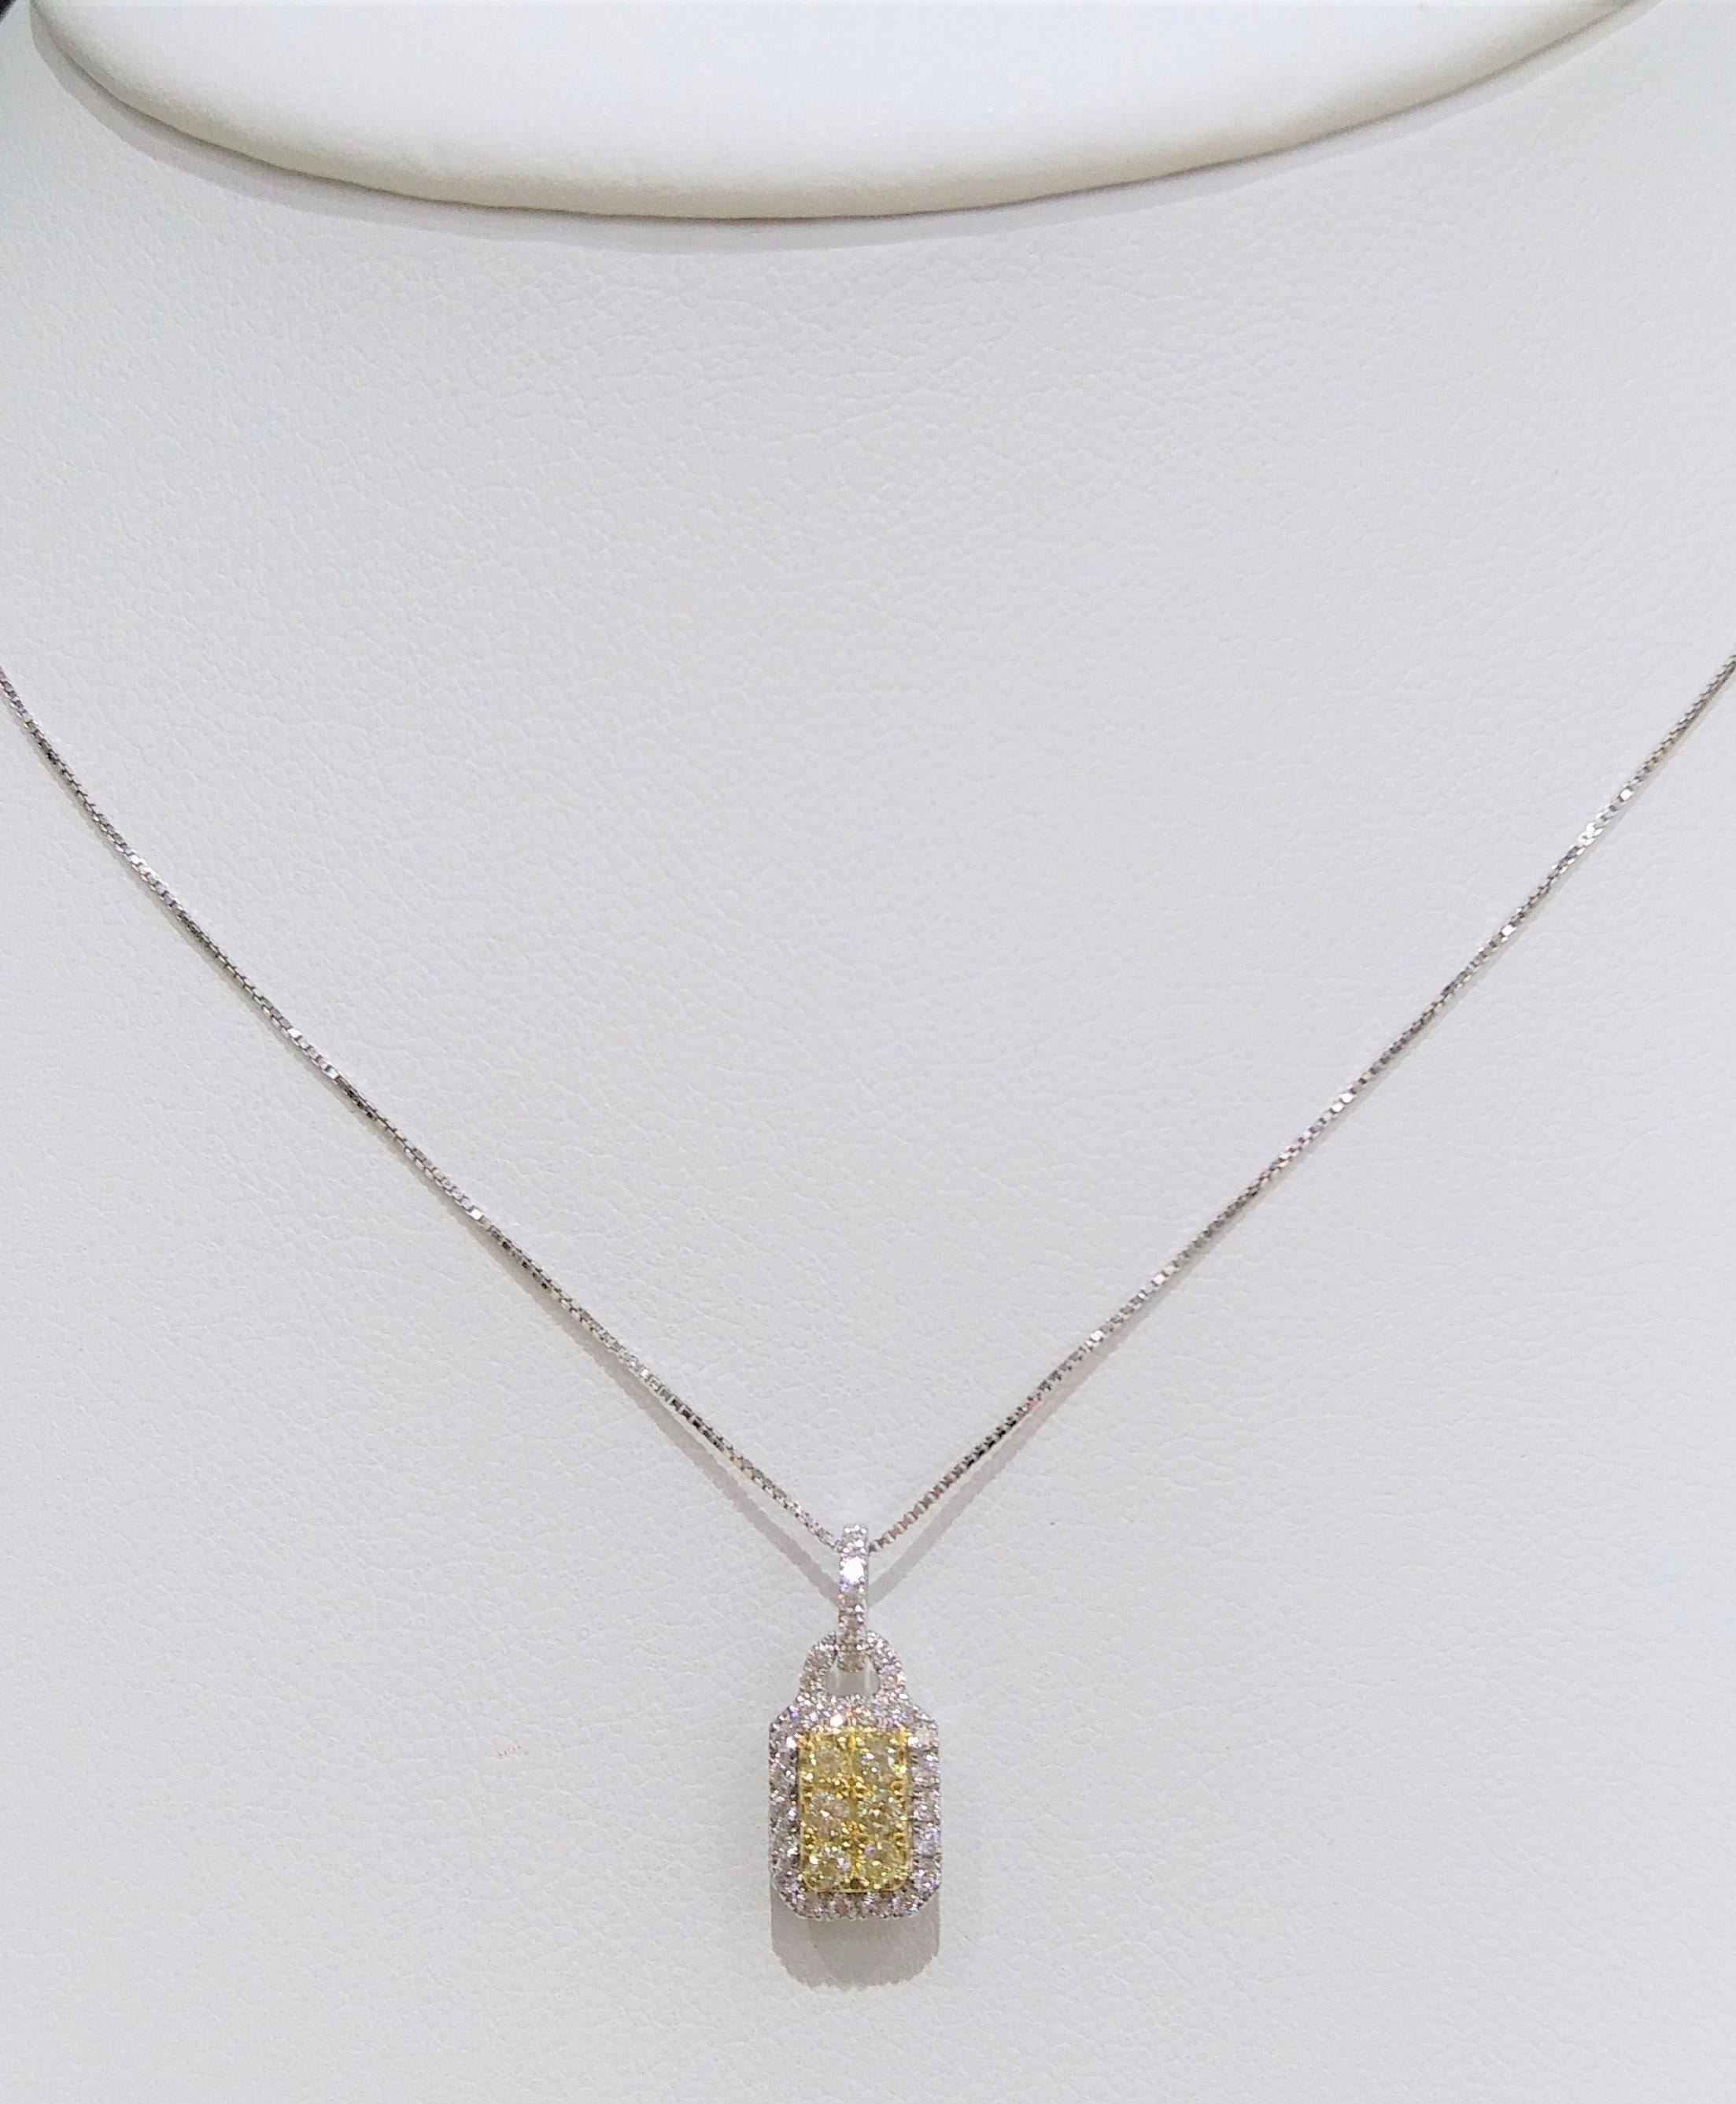 Round Cut Yellow Diamond Pendant Necklace with platinum Chain For Sale